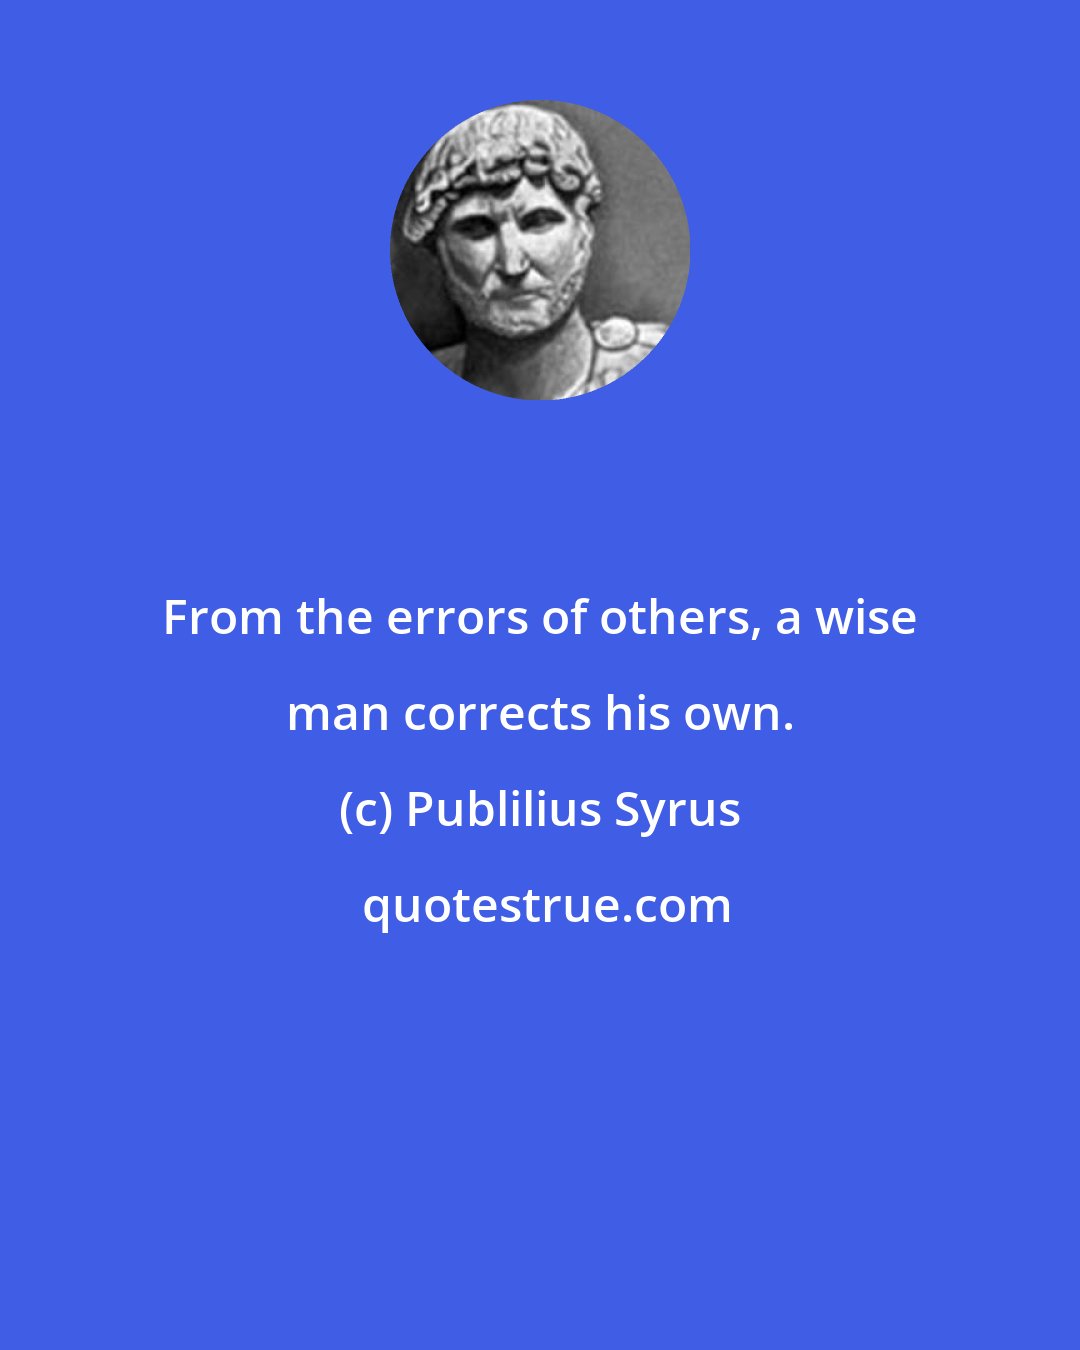 Publilius Syrus: From the errors of others, a wise man corrects his own.